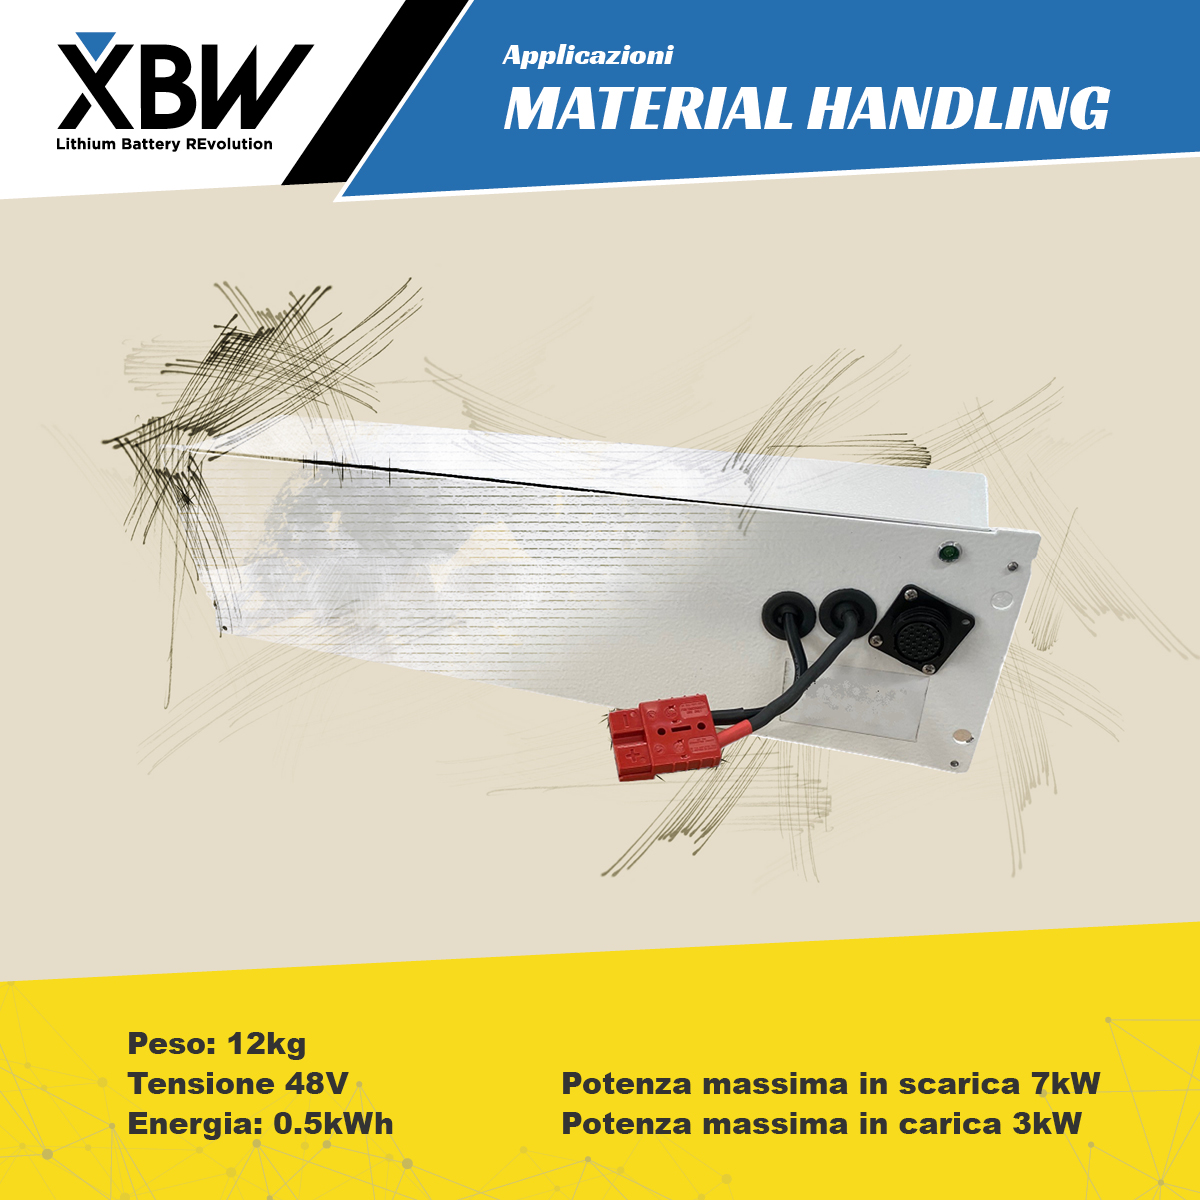 Applicazione Material Handling XBW